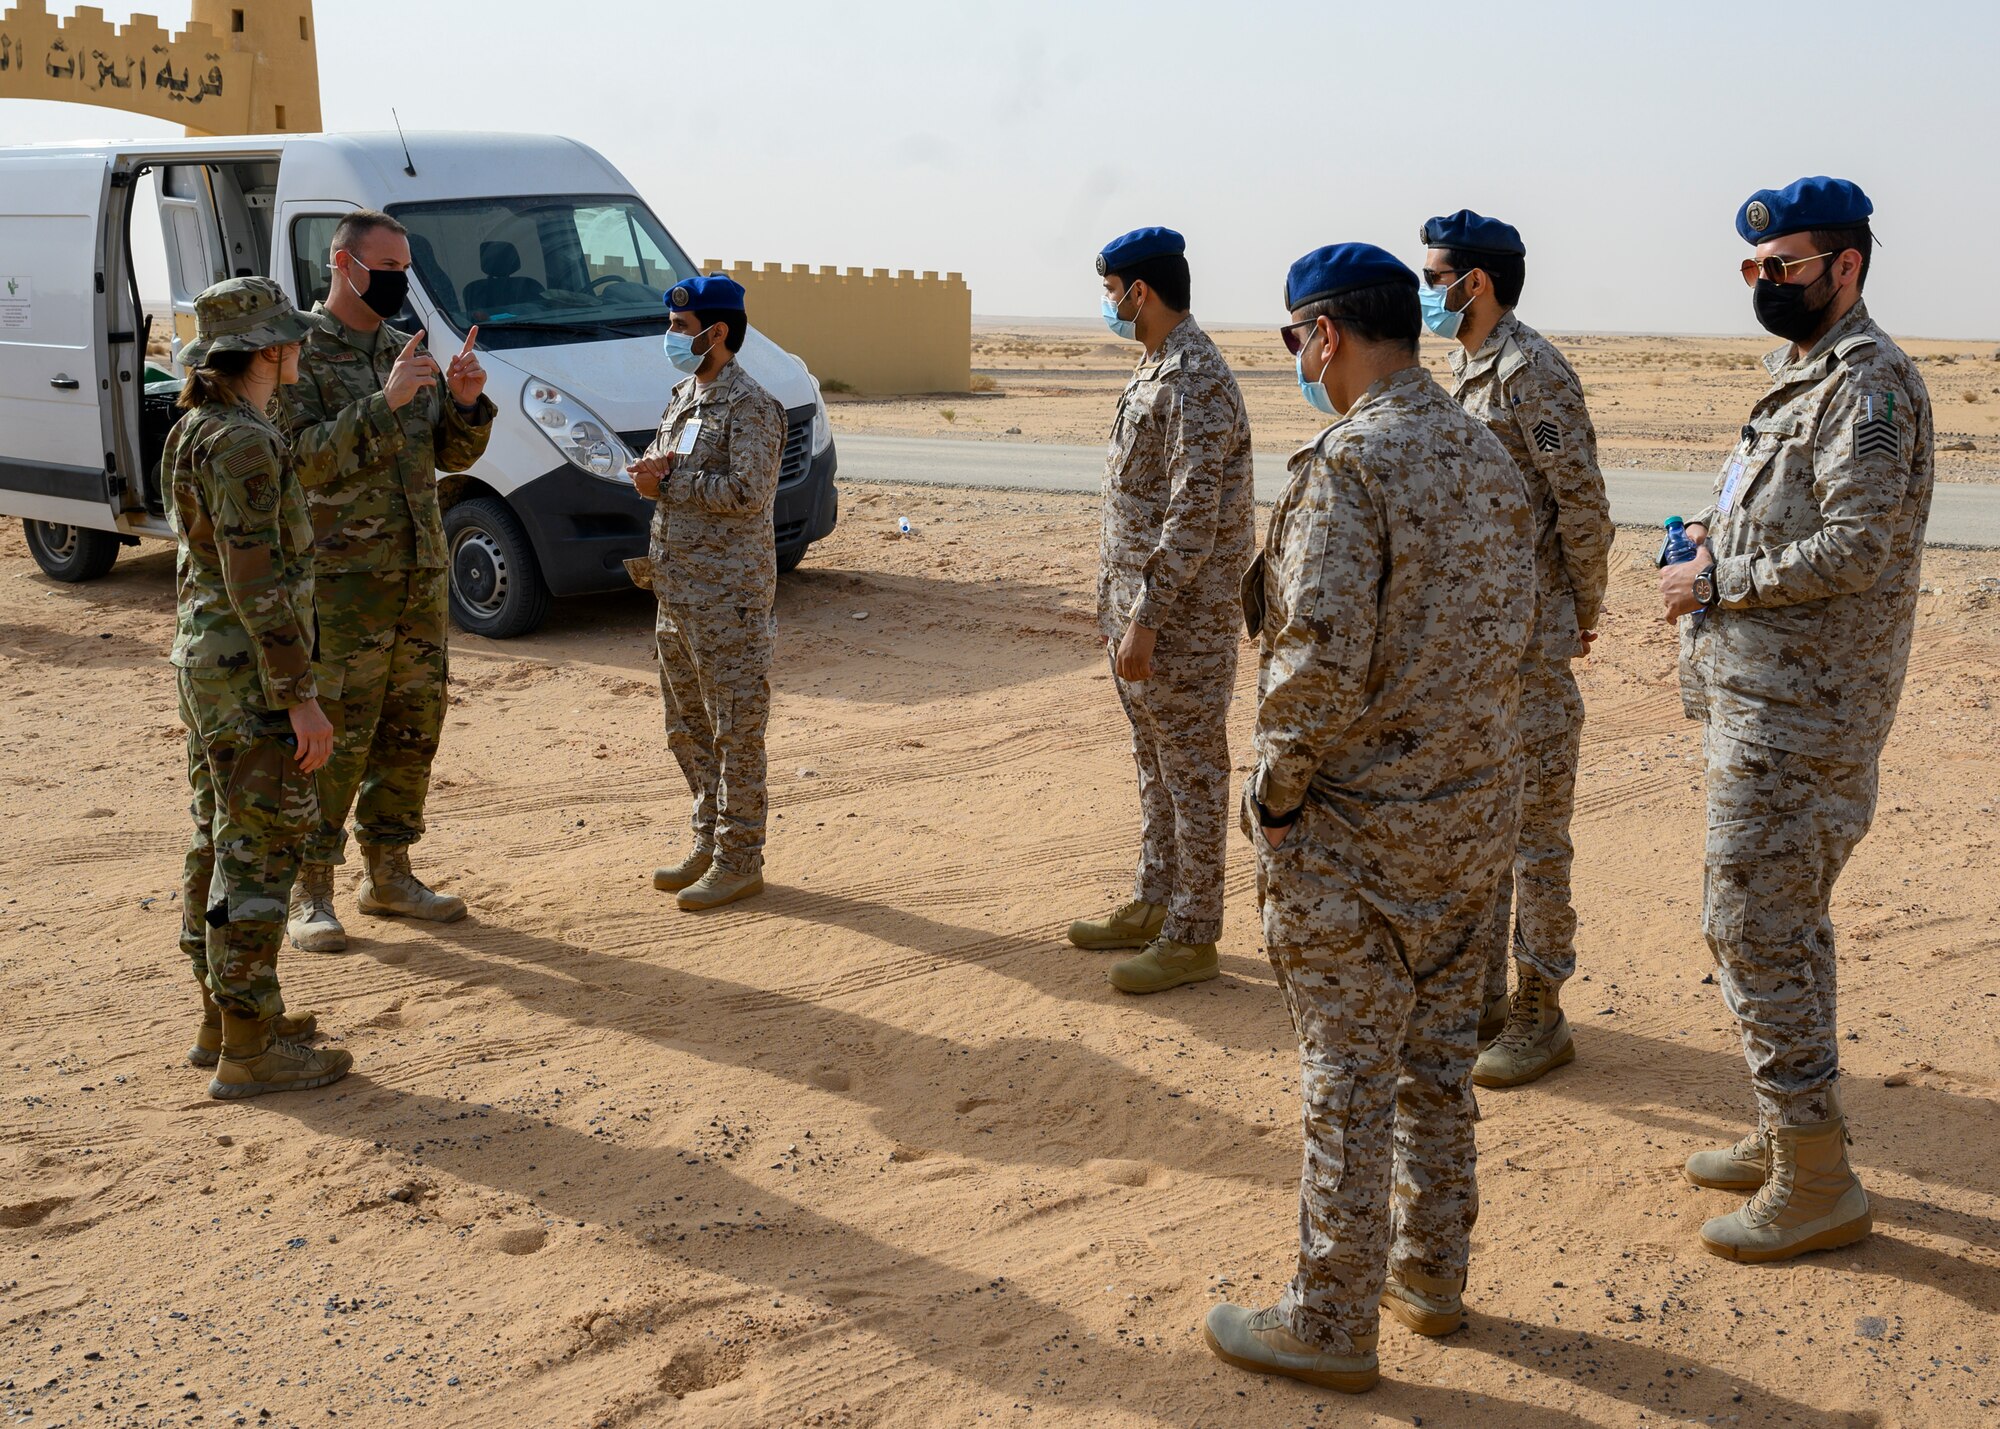 U.S. Air Force personnel from the 378th Civil Engineer Squadron emergency management flight explain the chemical, biological, radiological and nuclear defense exercise with members of the Royal Saudi Air Force, PSAB, Kingdom of Saudi Arabia, May 26, 2021. The combined exercise demonstrates the emergency management integration between USAF and RSAF CBRN response units while also familiarizing each unit with the other’s techniques and procedures. (U.S. Air Force photo by Senior Airman Samuel Earick)